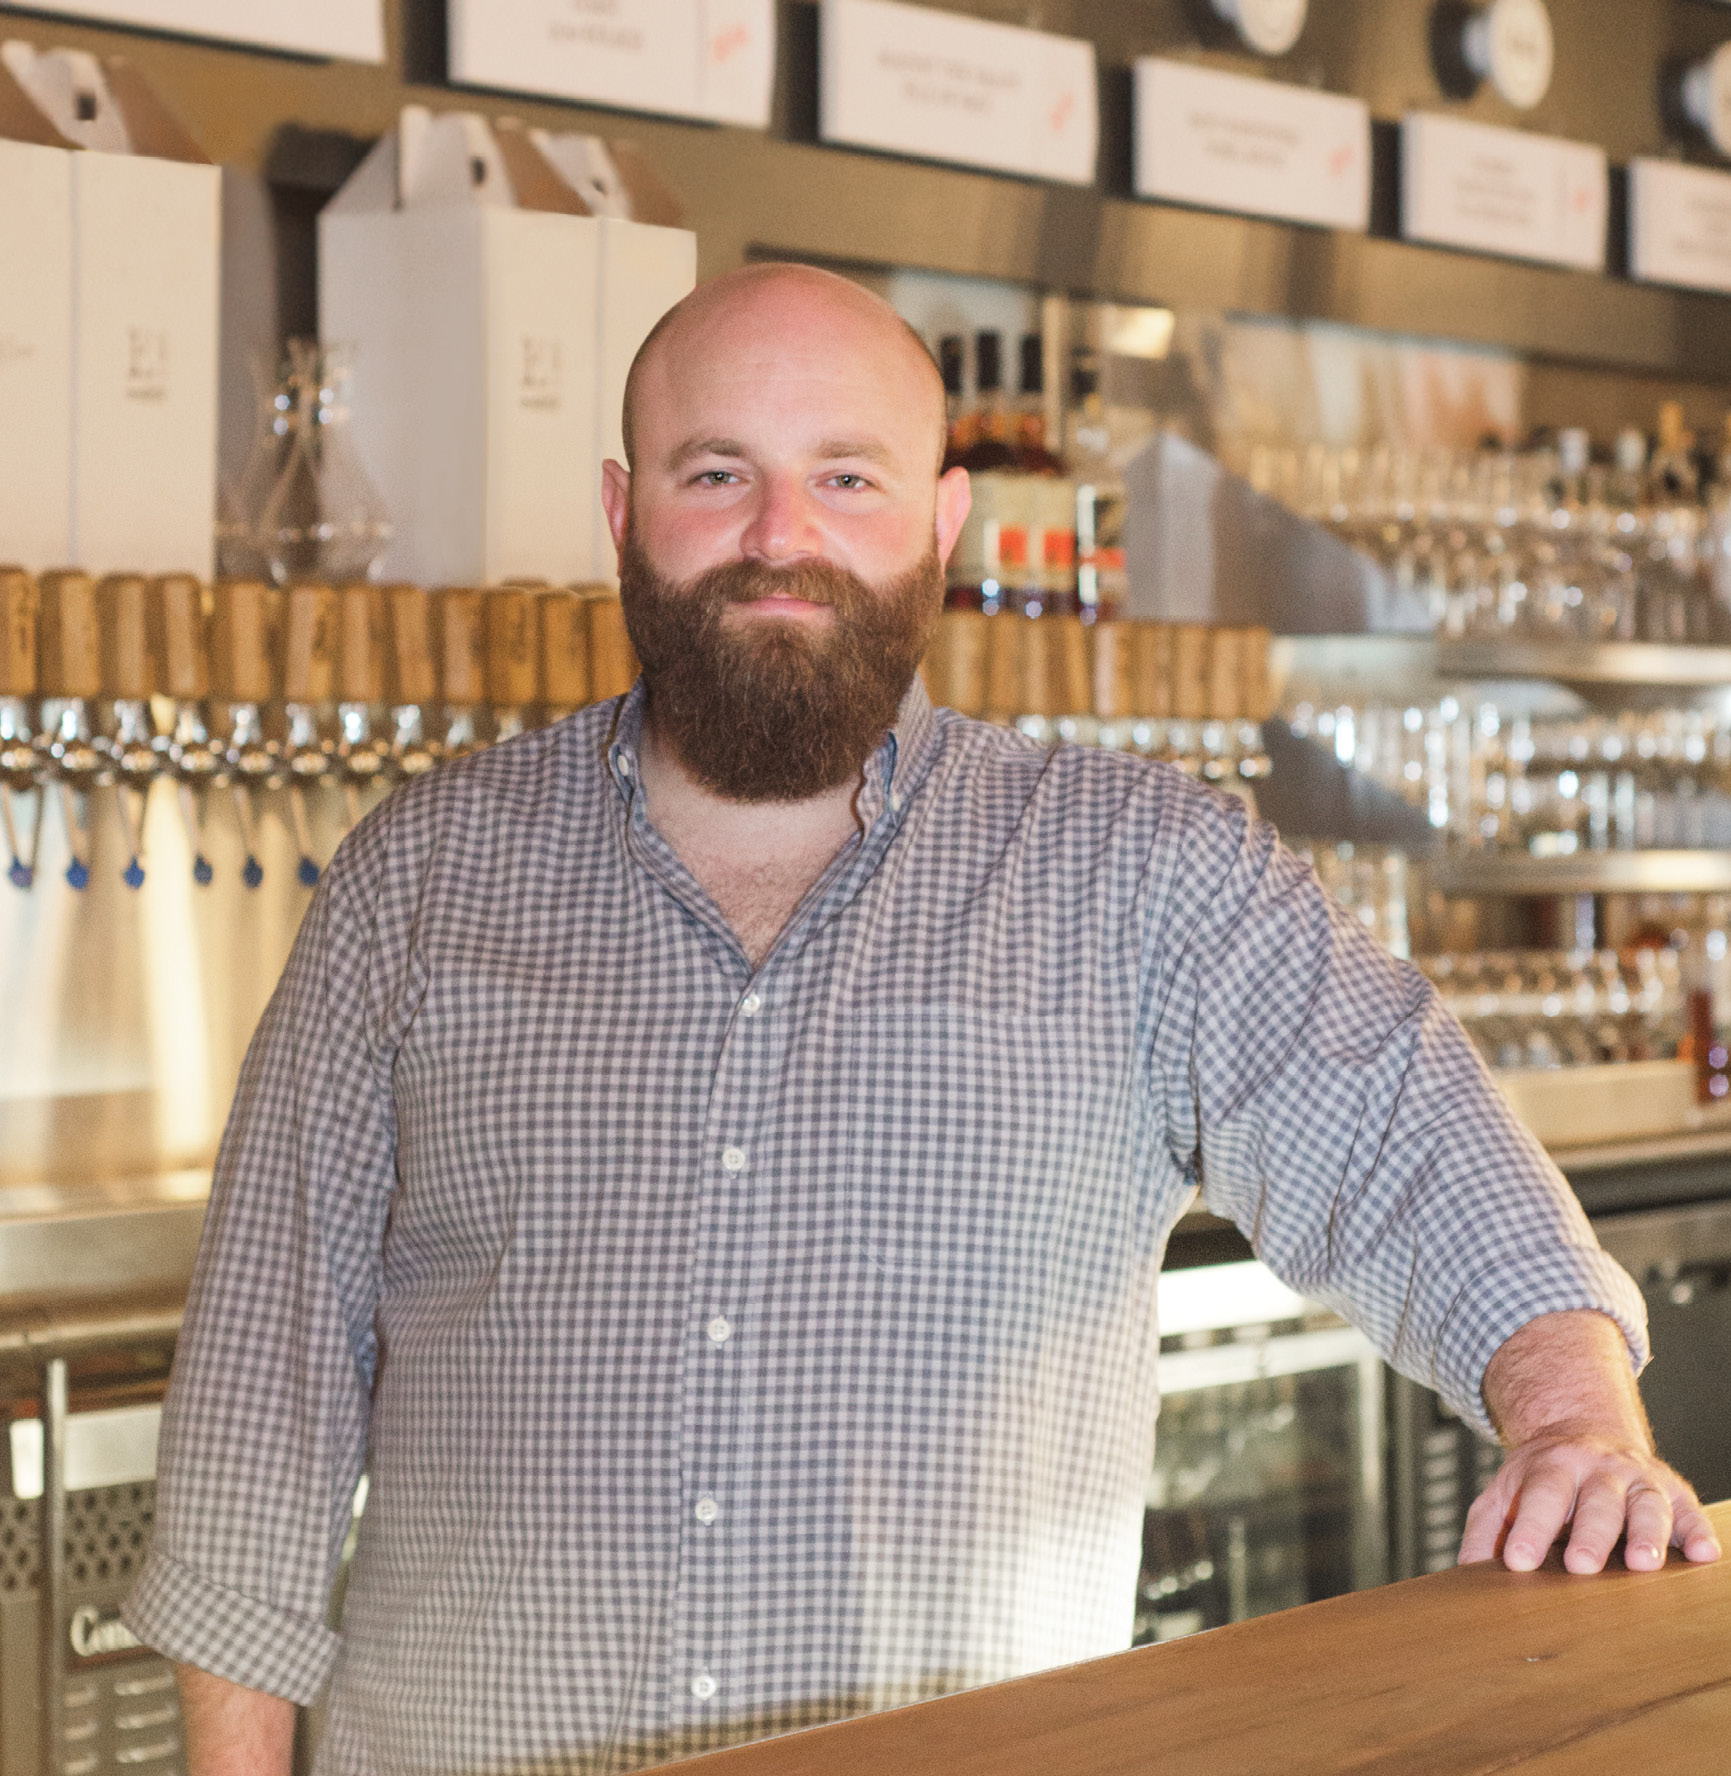 “I’m still enamored with wine and spirits, but I really love the beer industry.” —Scott Shor